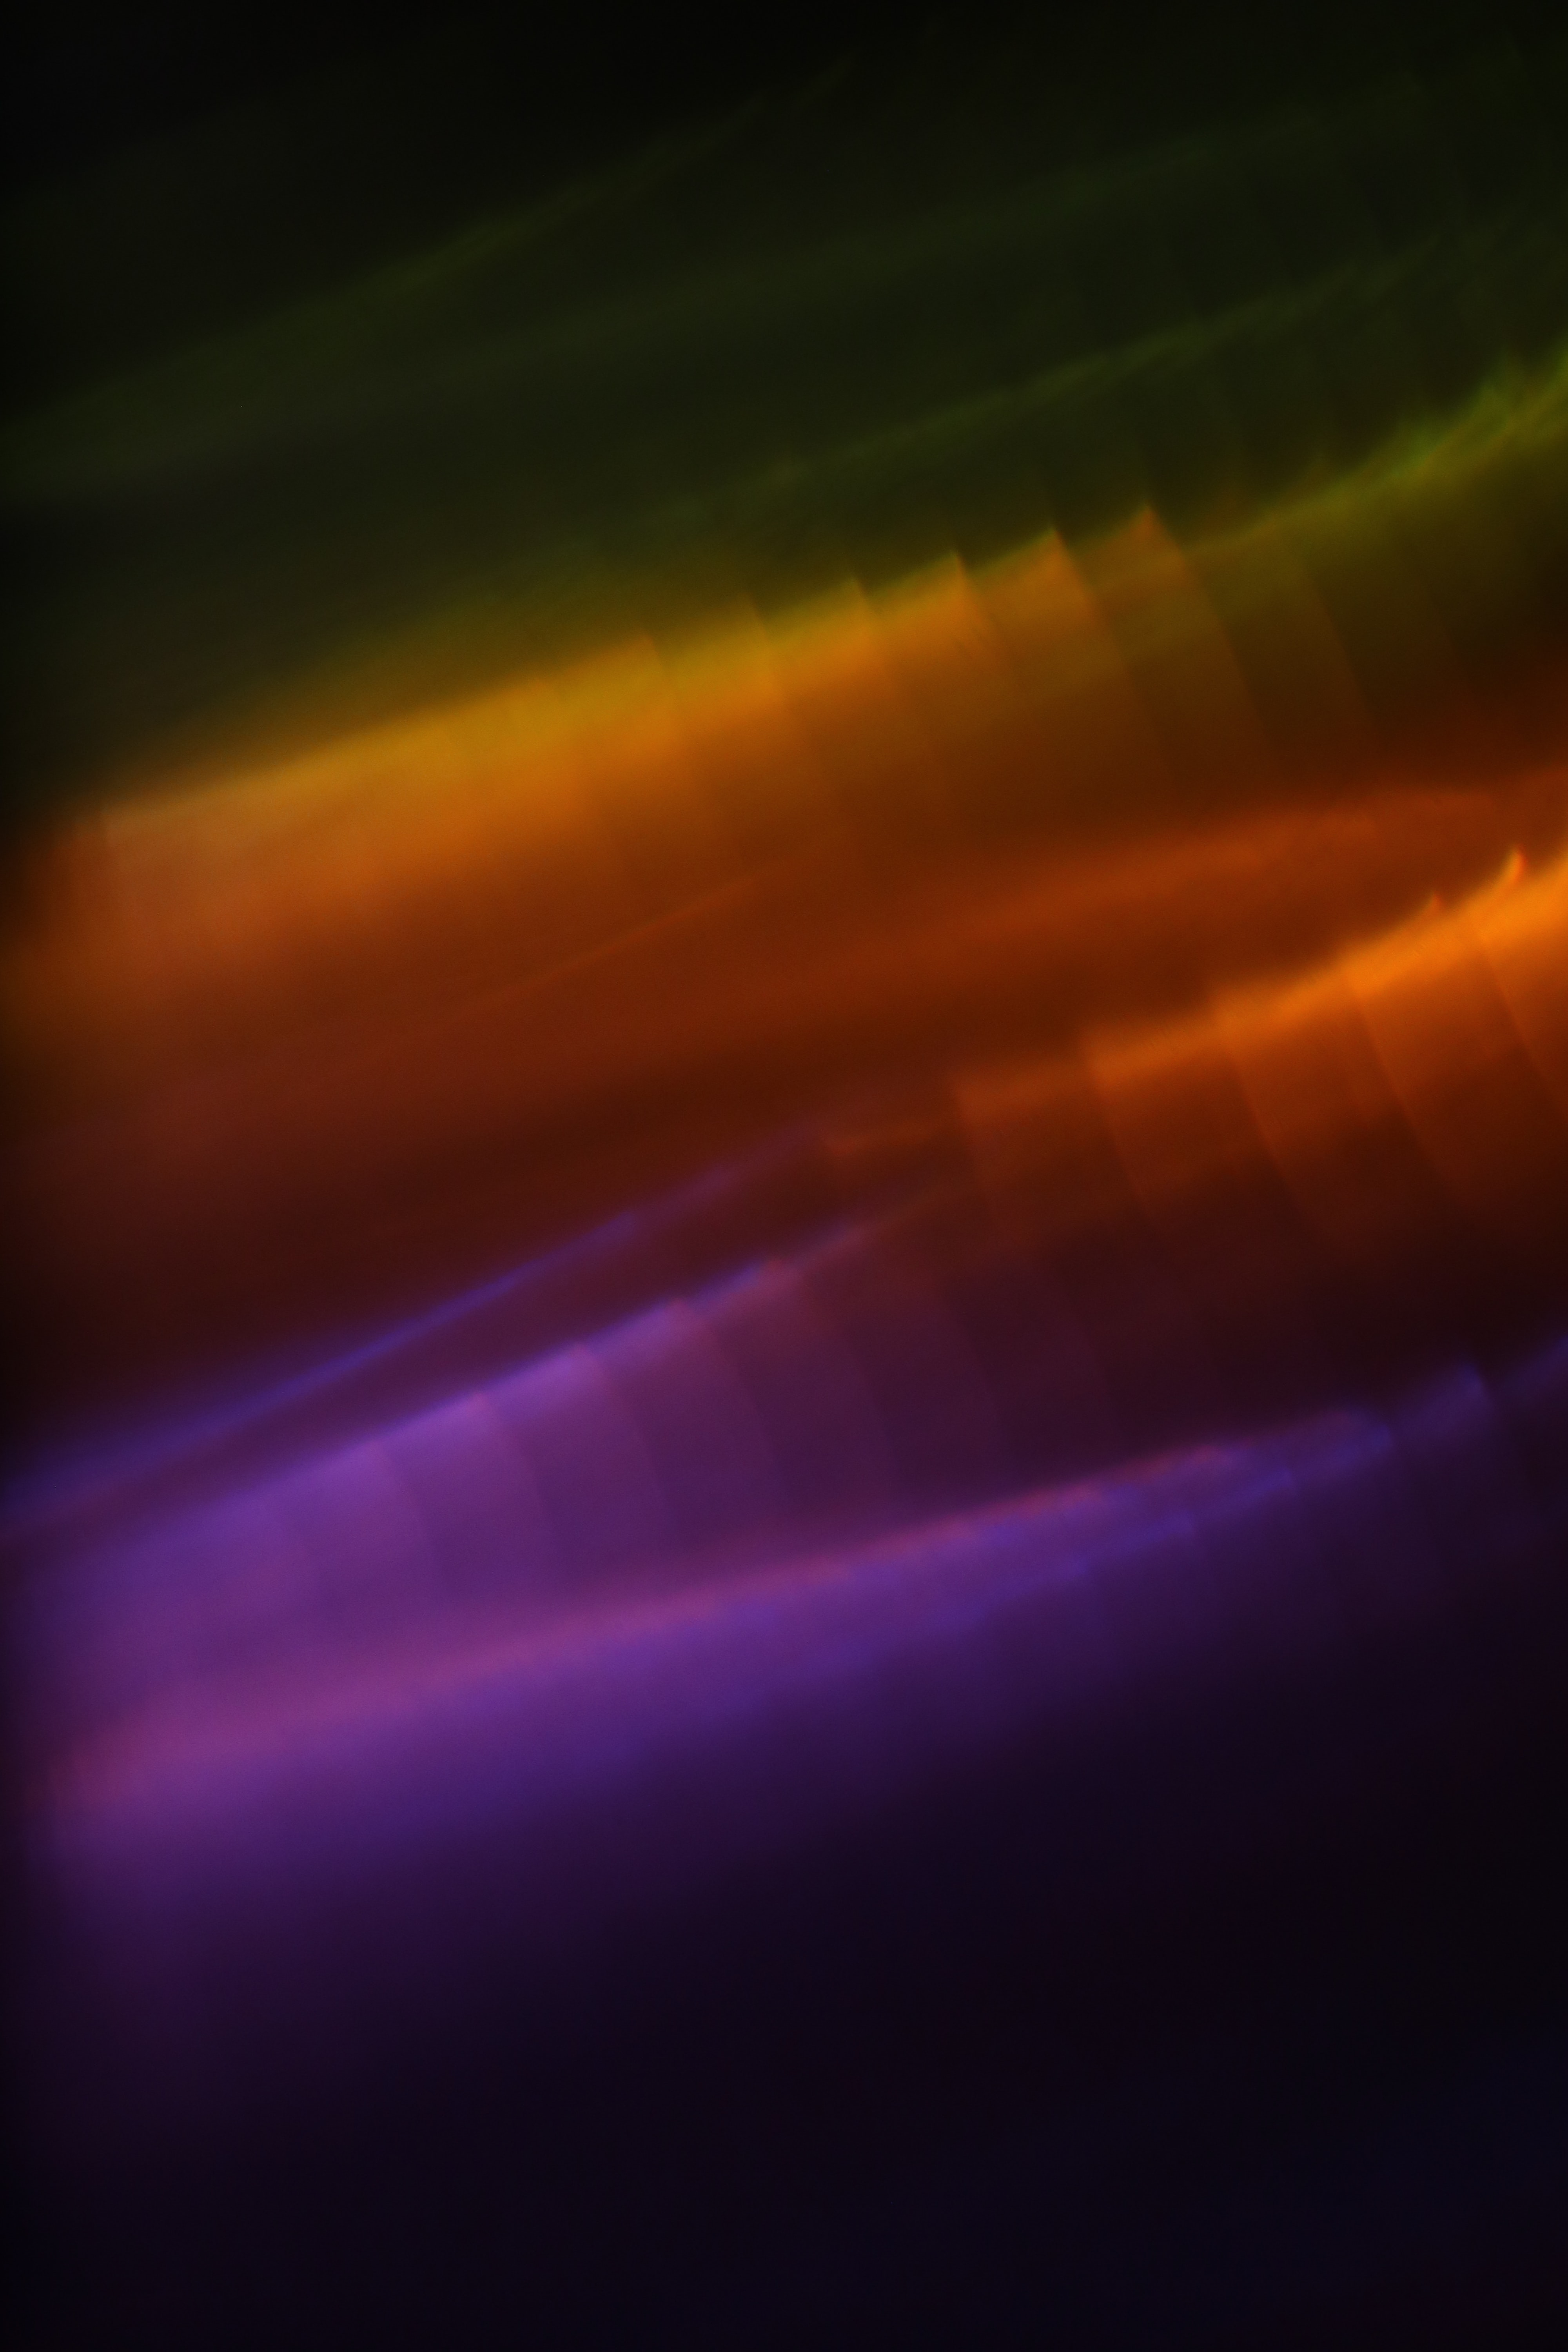 83062 download wallpaper abstract, multicolored, motley, blur, smooth, gradient screensavers and pictures for free